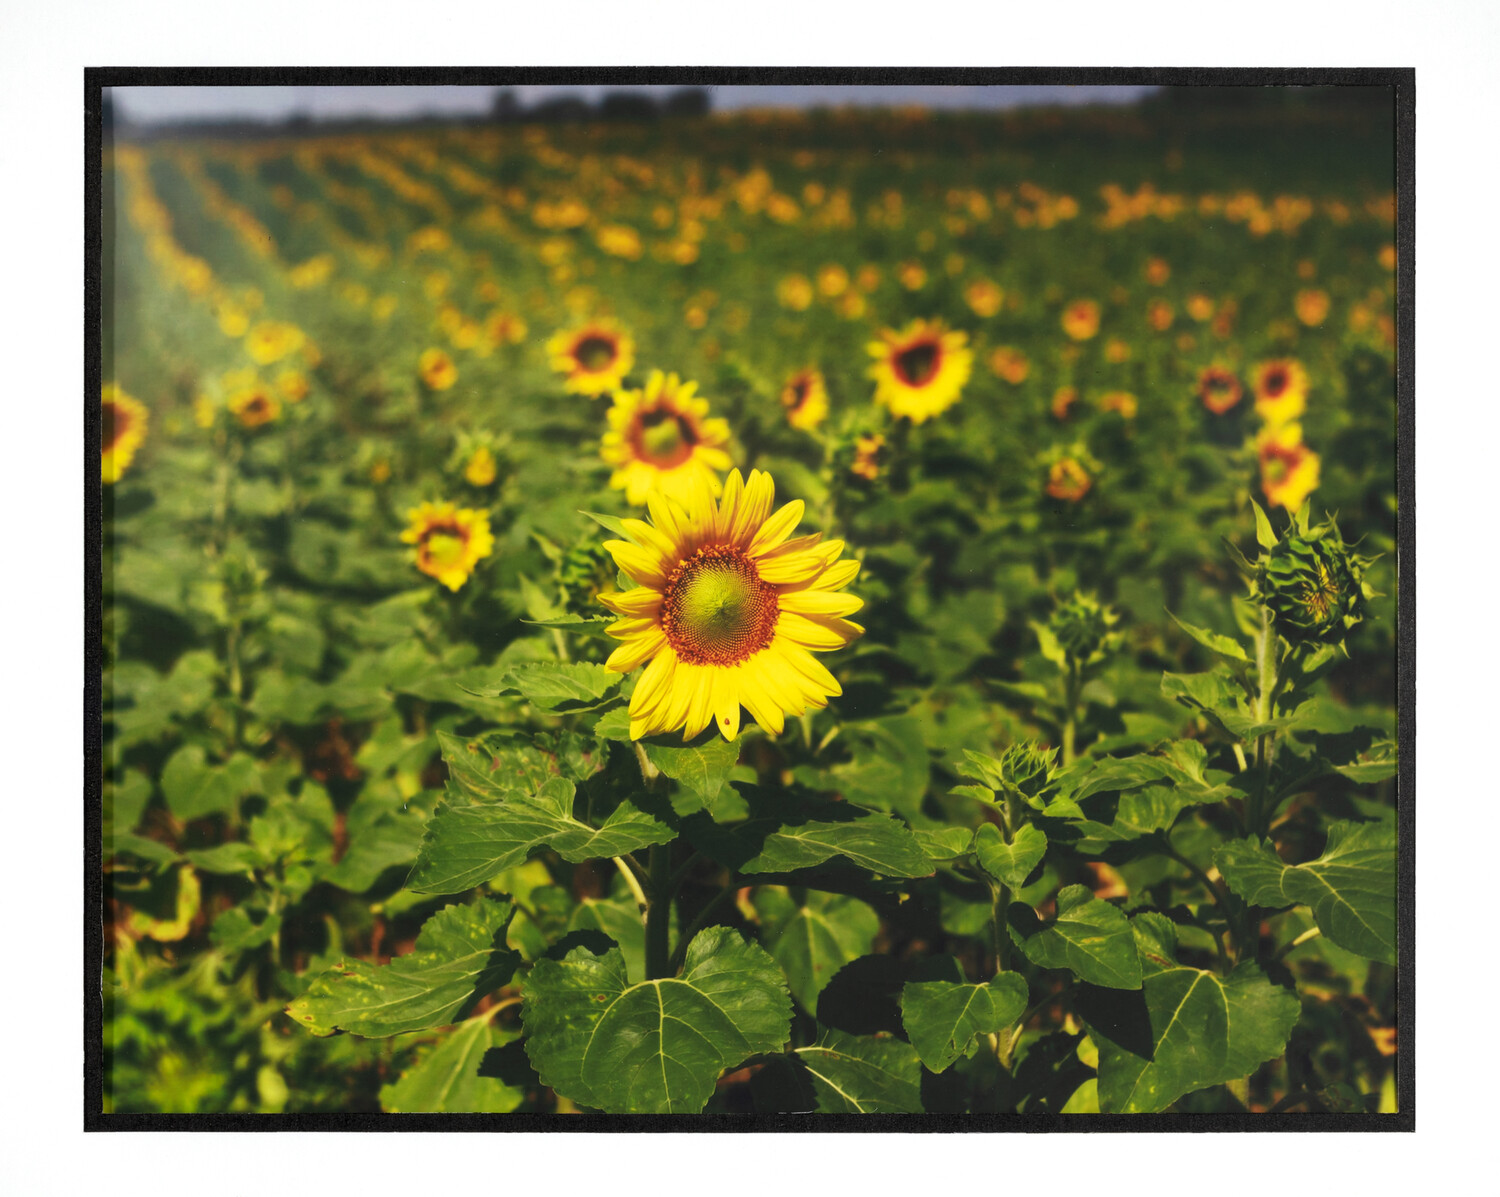 photo of By the Road, a photograph focused on one sunflower in a field of sunflowers